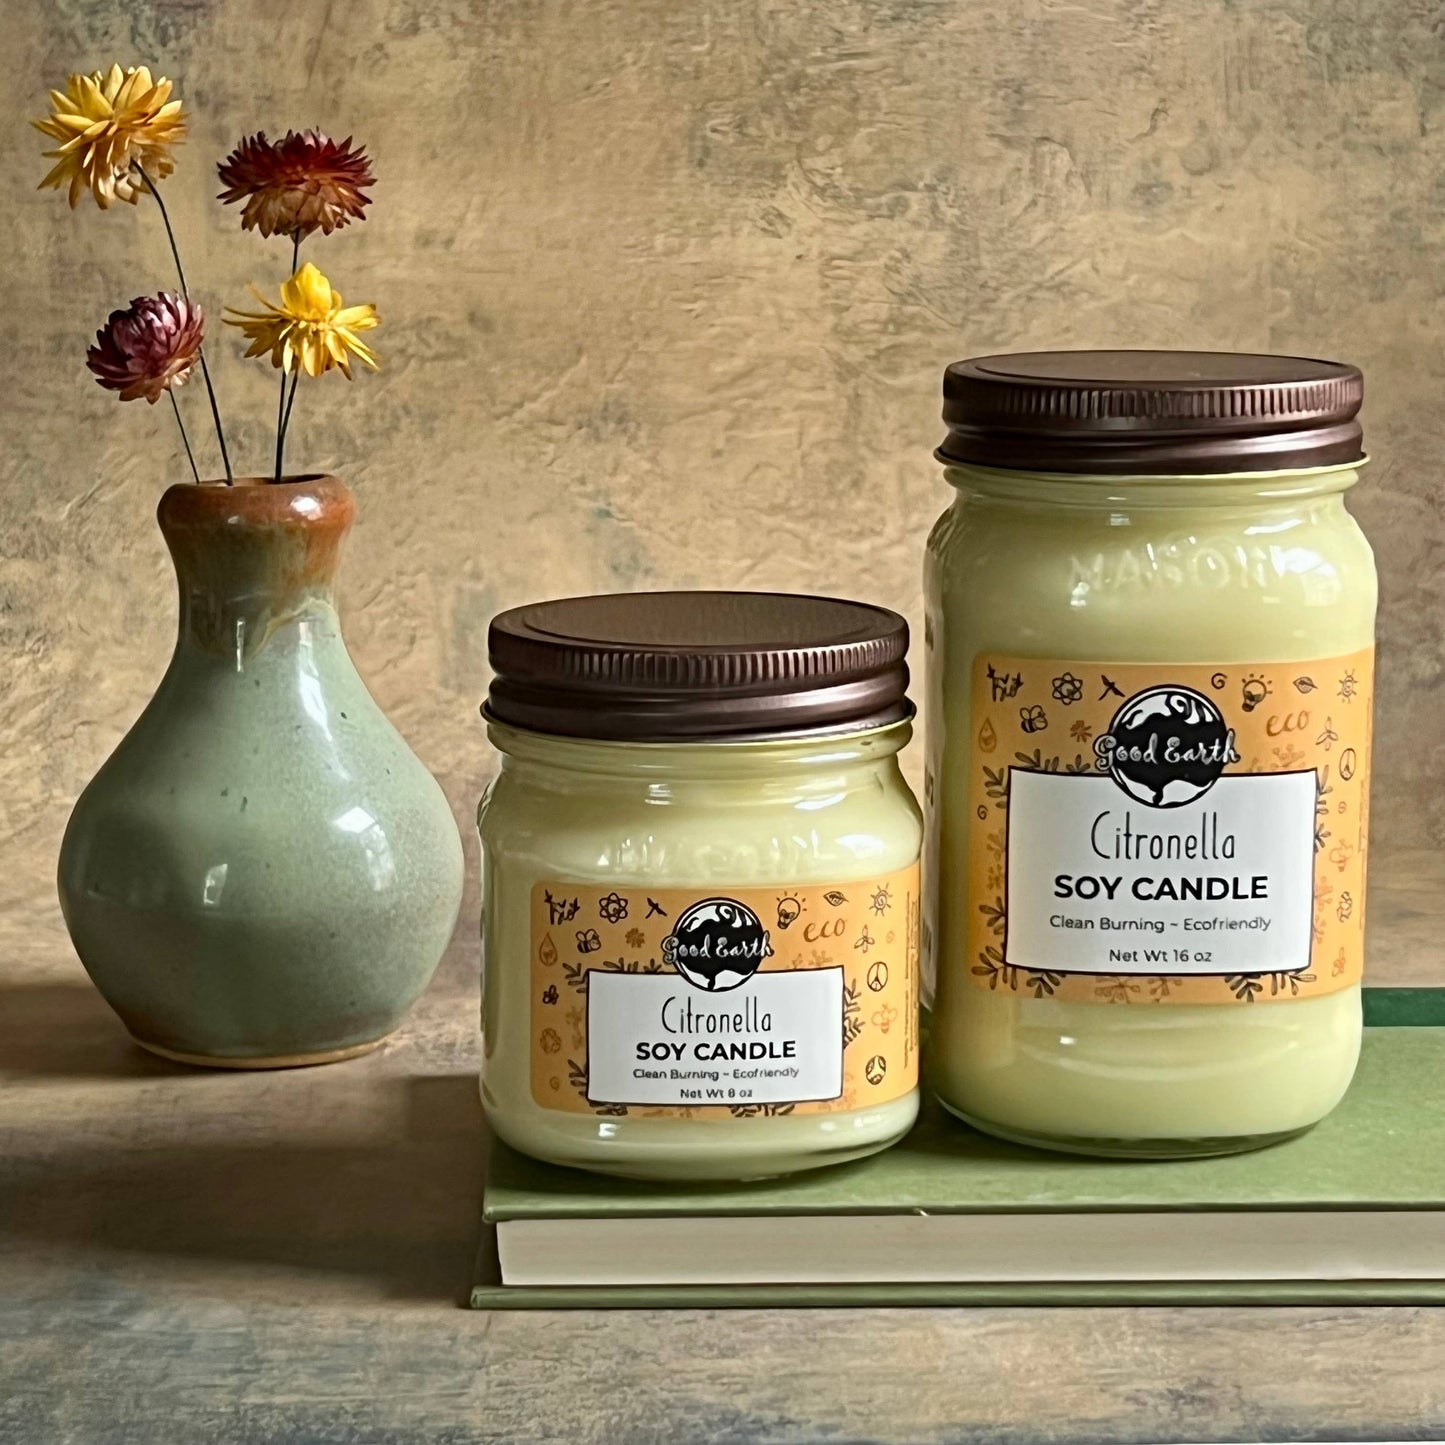 Good Earth Soap - Citronella Soy Candle